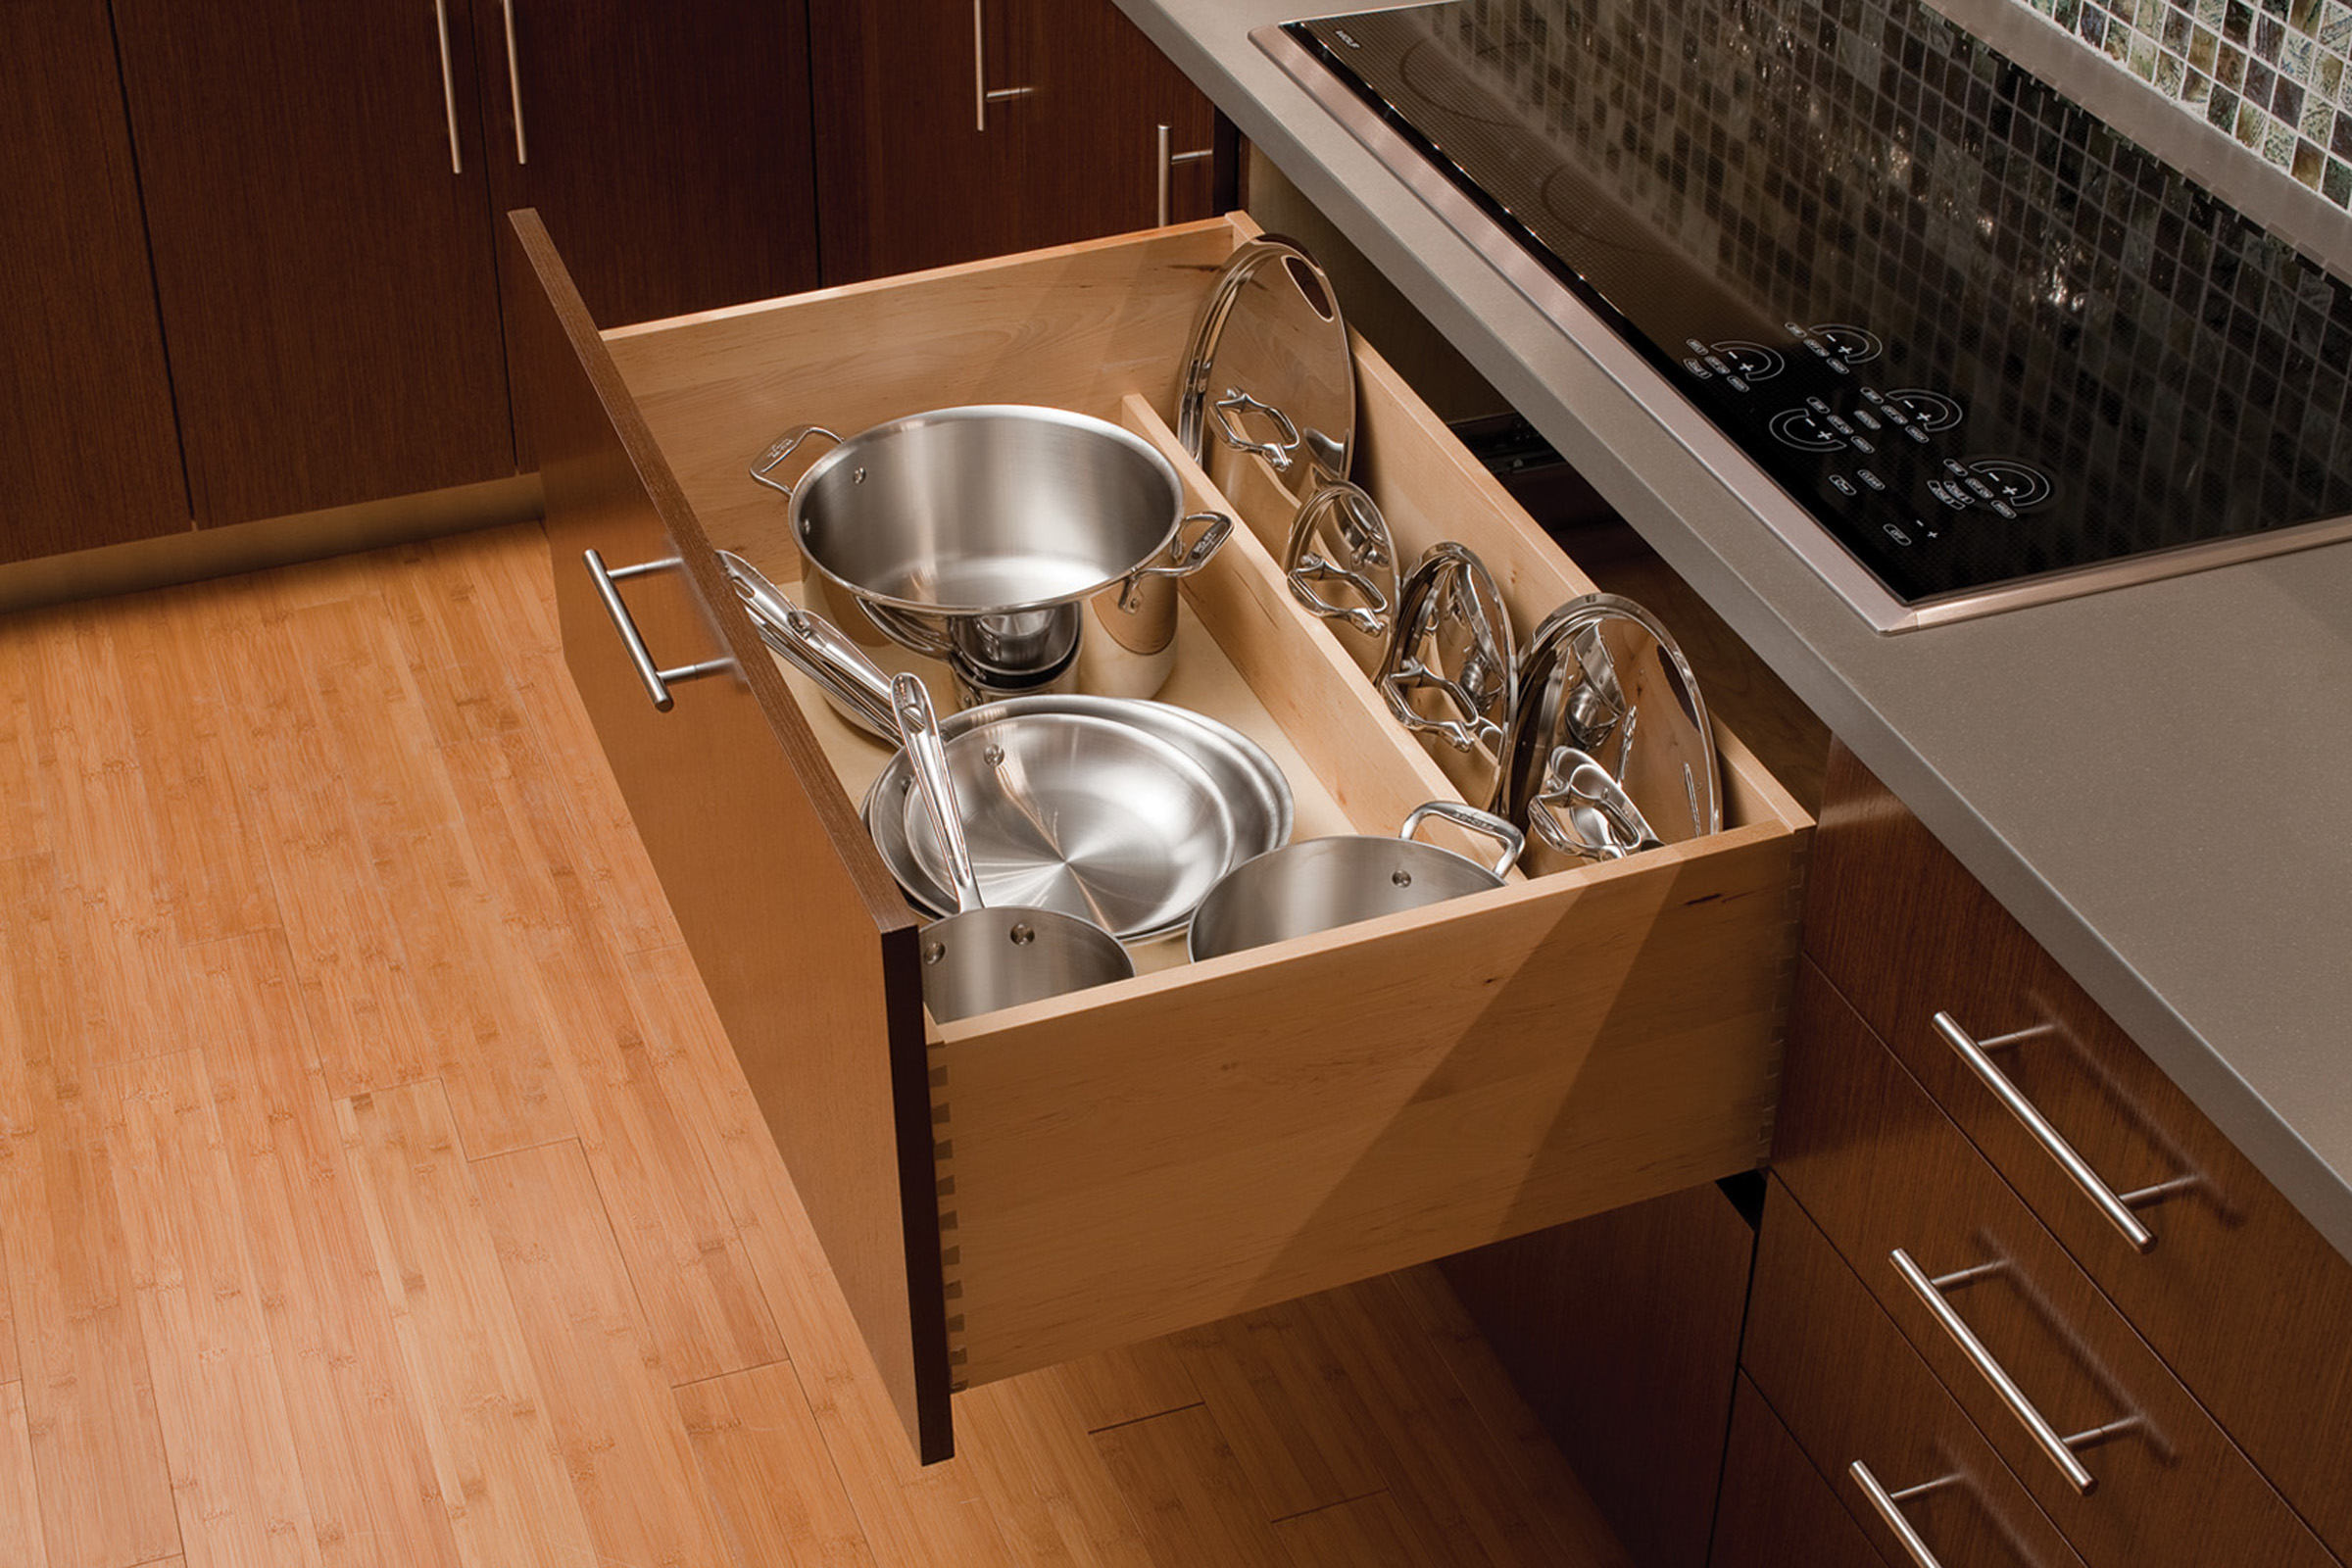 A Lid Storage Partition from Dura Supreme placed at the back of a wide, deep drawer neatly stores pot and pan lids to keep your pot and pan storage orderly and easy to access.